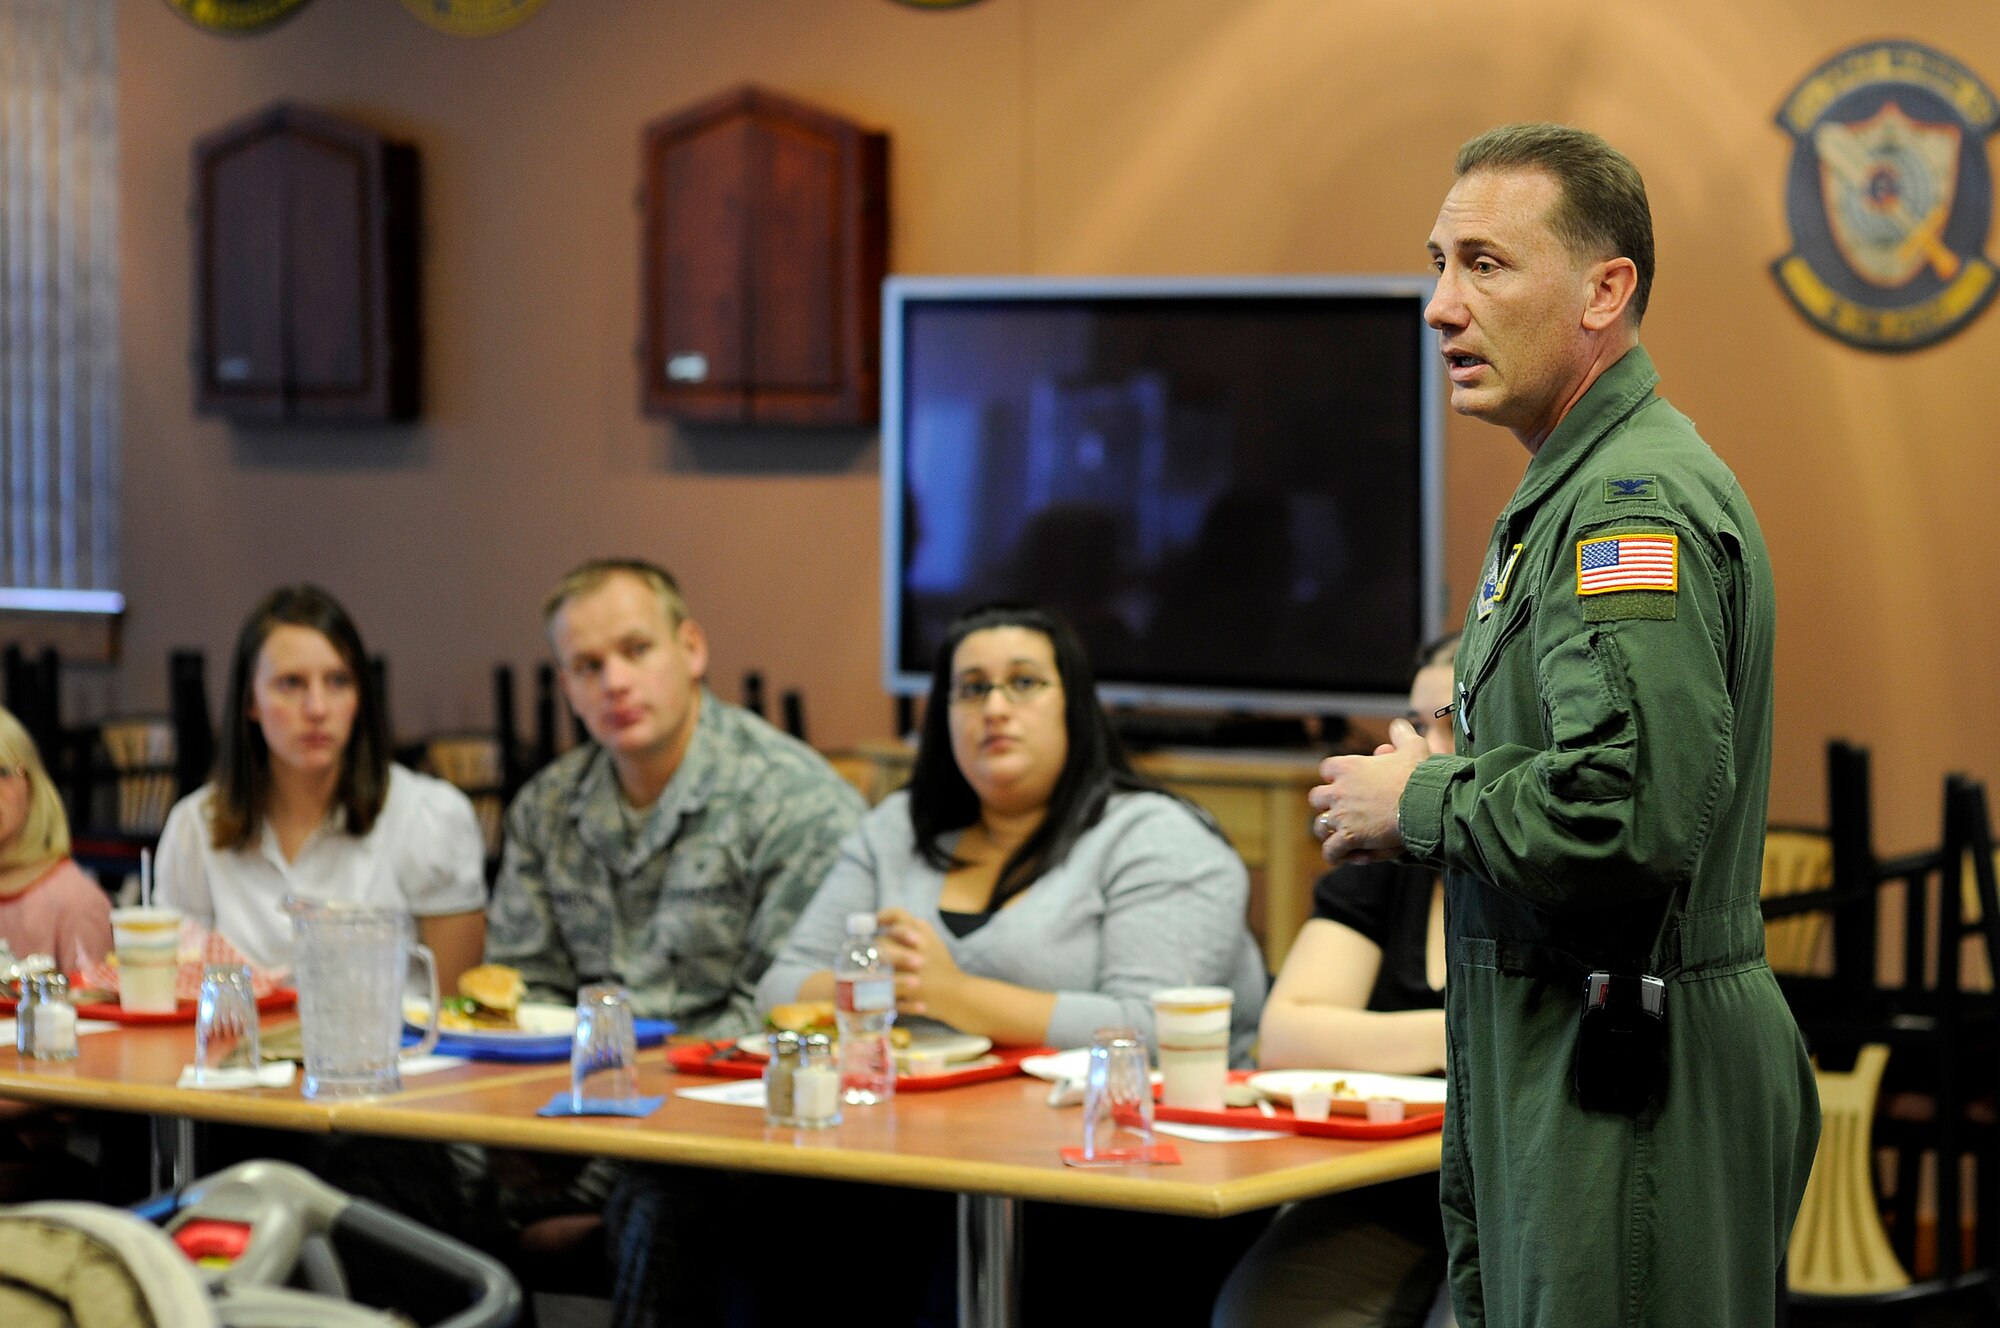 BUCKLEY AIR FORCE BASE, Colo. -- Col. Clint Crosier, 460th Space Wing Commander, speaks with members of Team Buckley and their spouses during lunch Nov. 6. (U.S. Air Force photo by Staff Sgt. Steve Czyz)